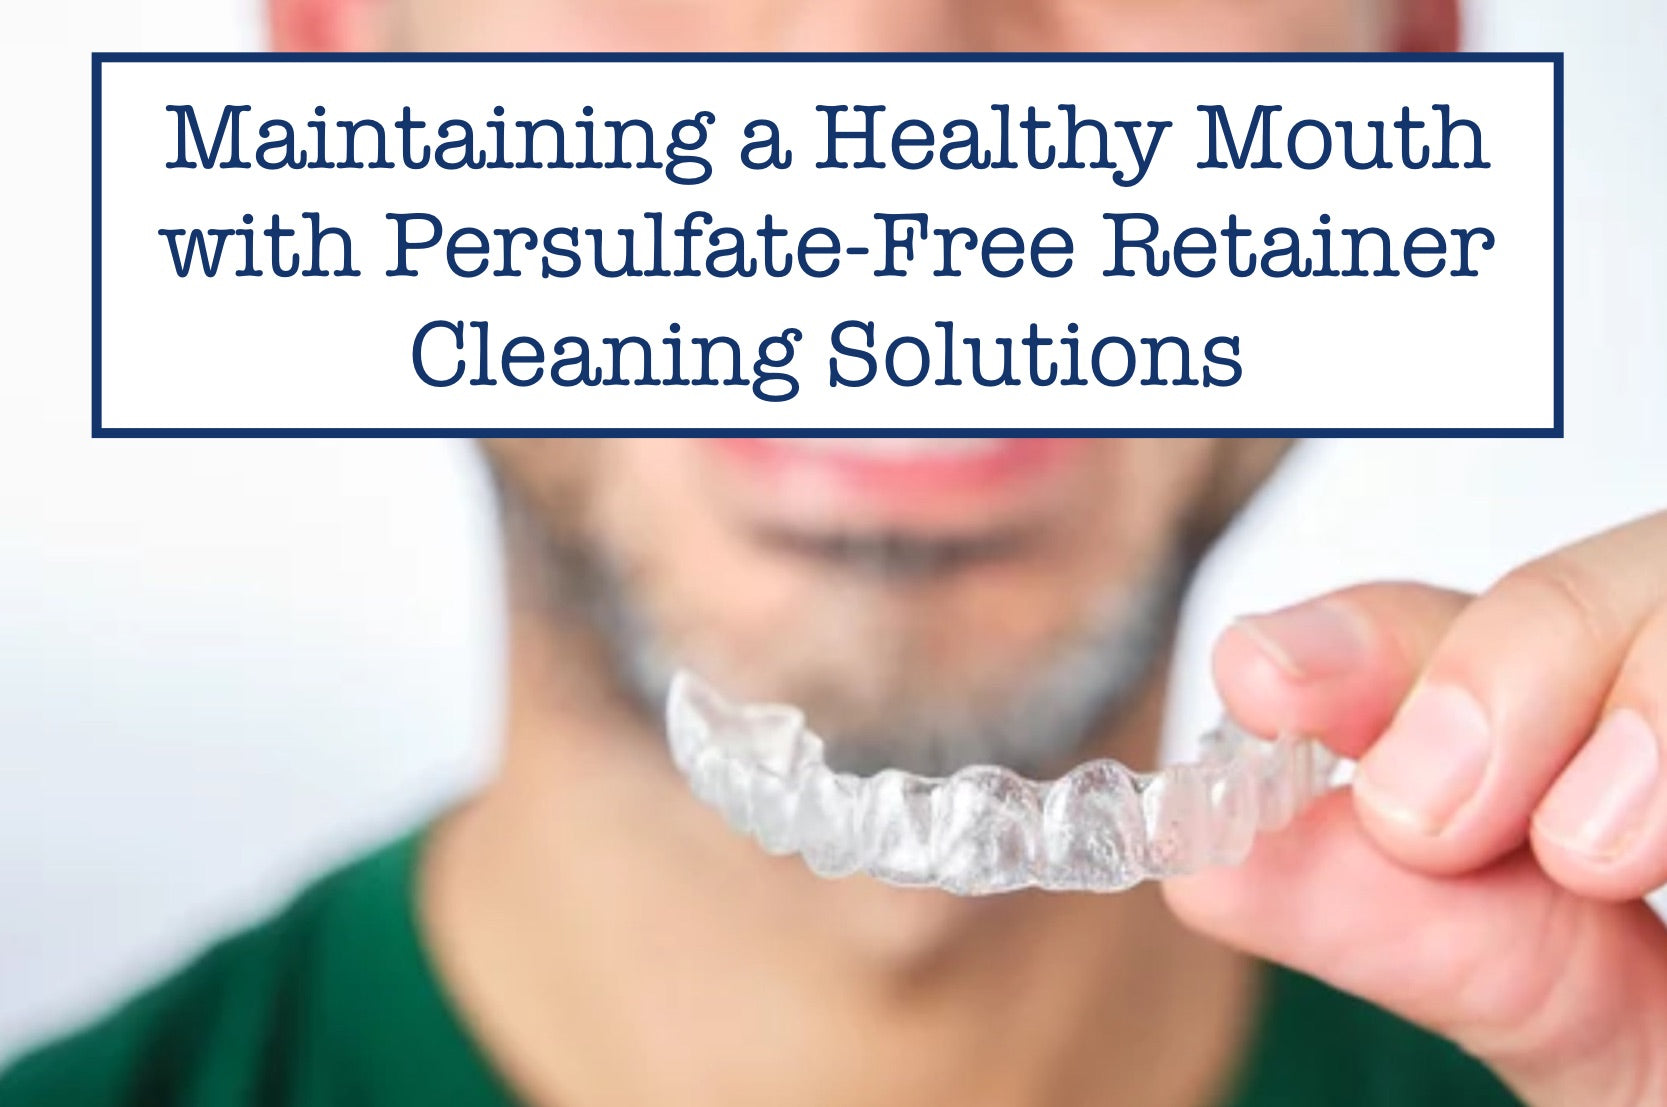 Maintaining a Healthy Mouth with Persulfate-Free Retainer Cleaning Solutions